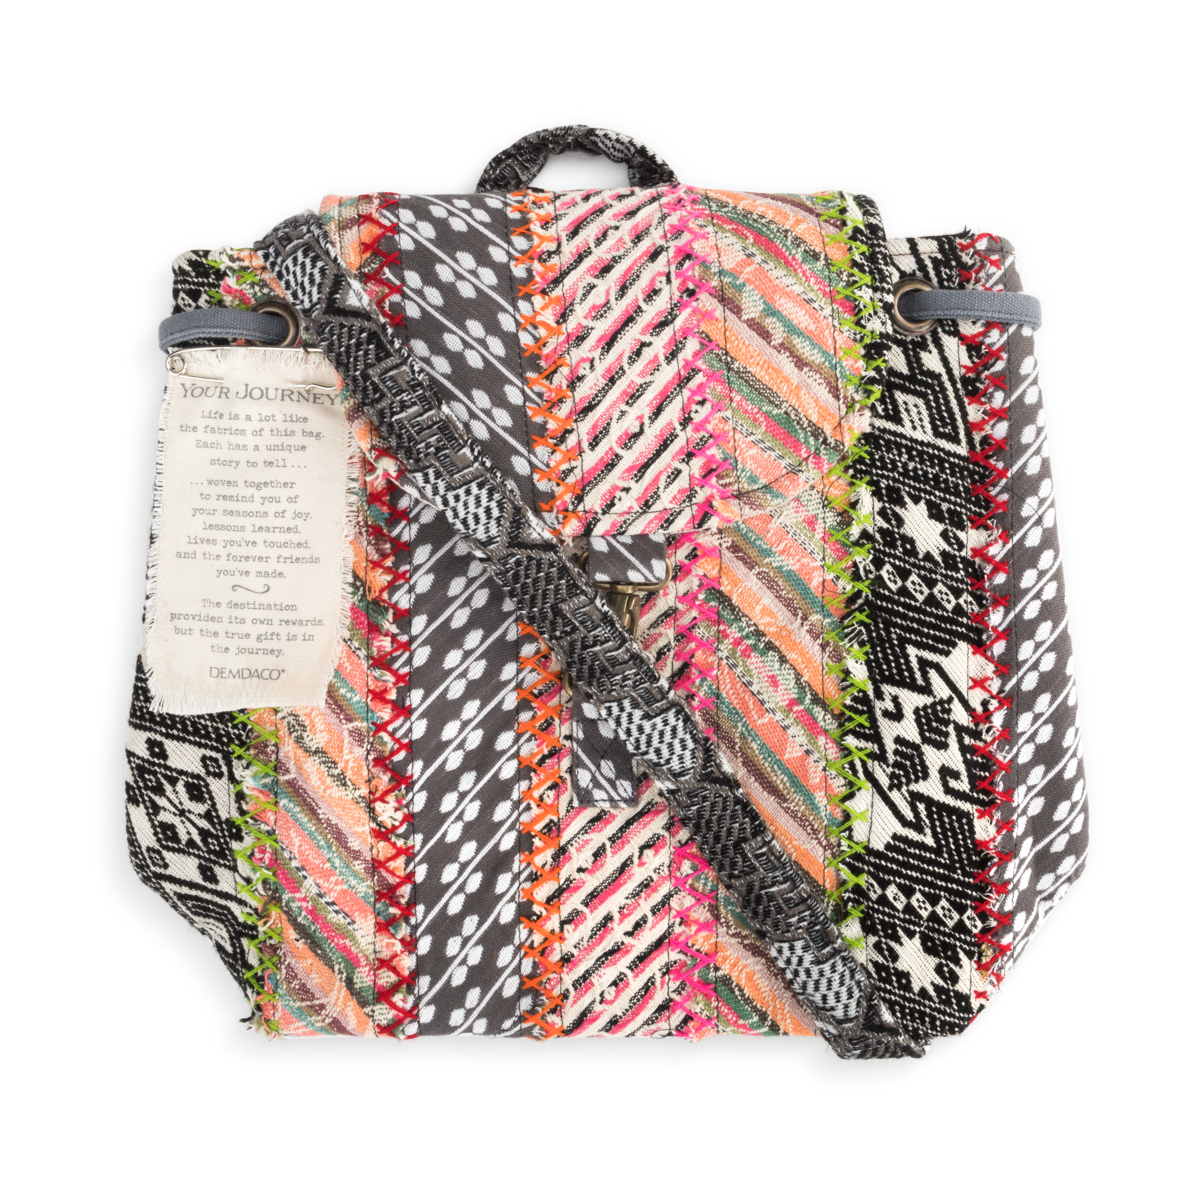 Your Journey multicolored backpack